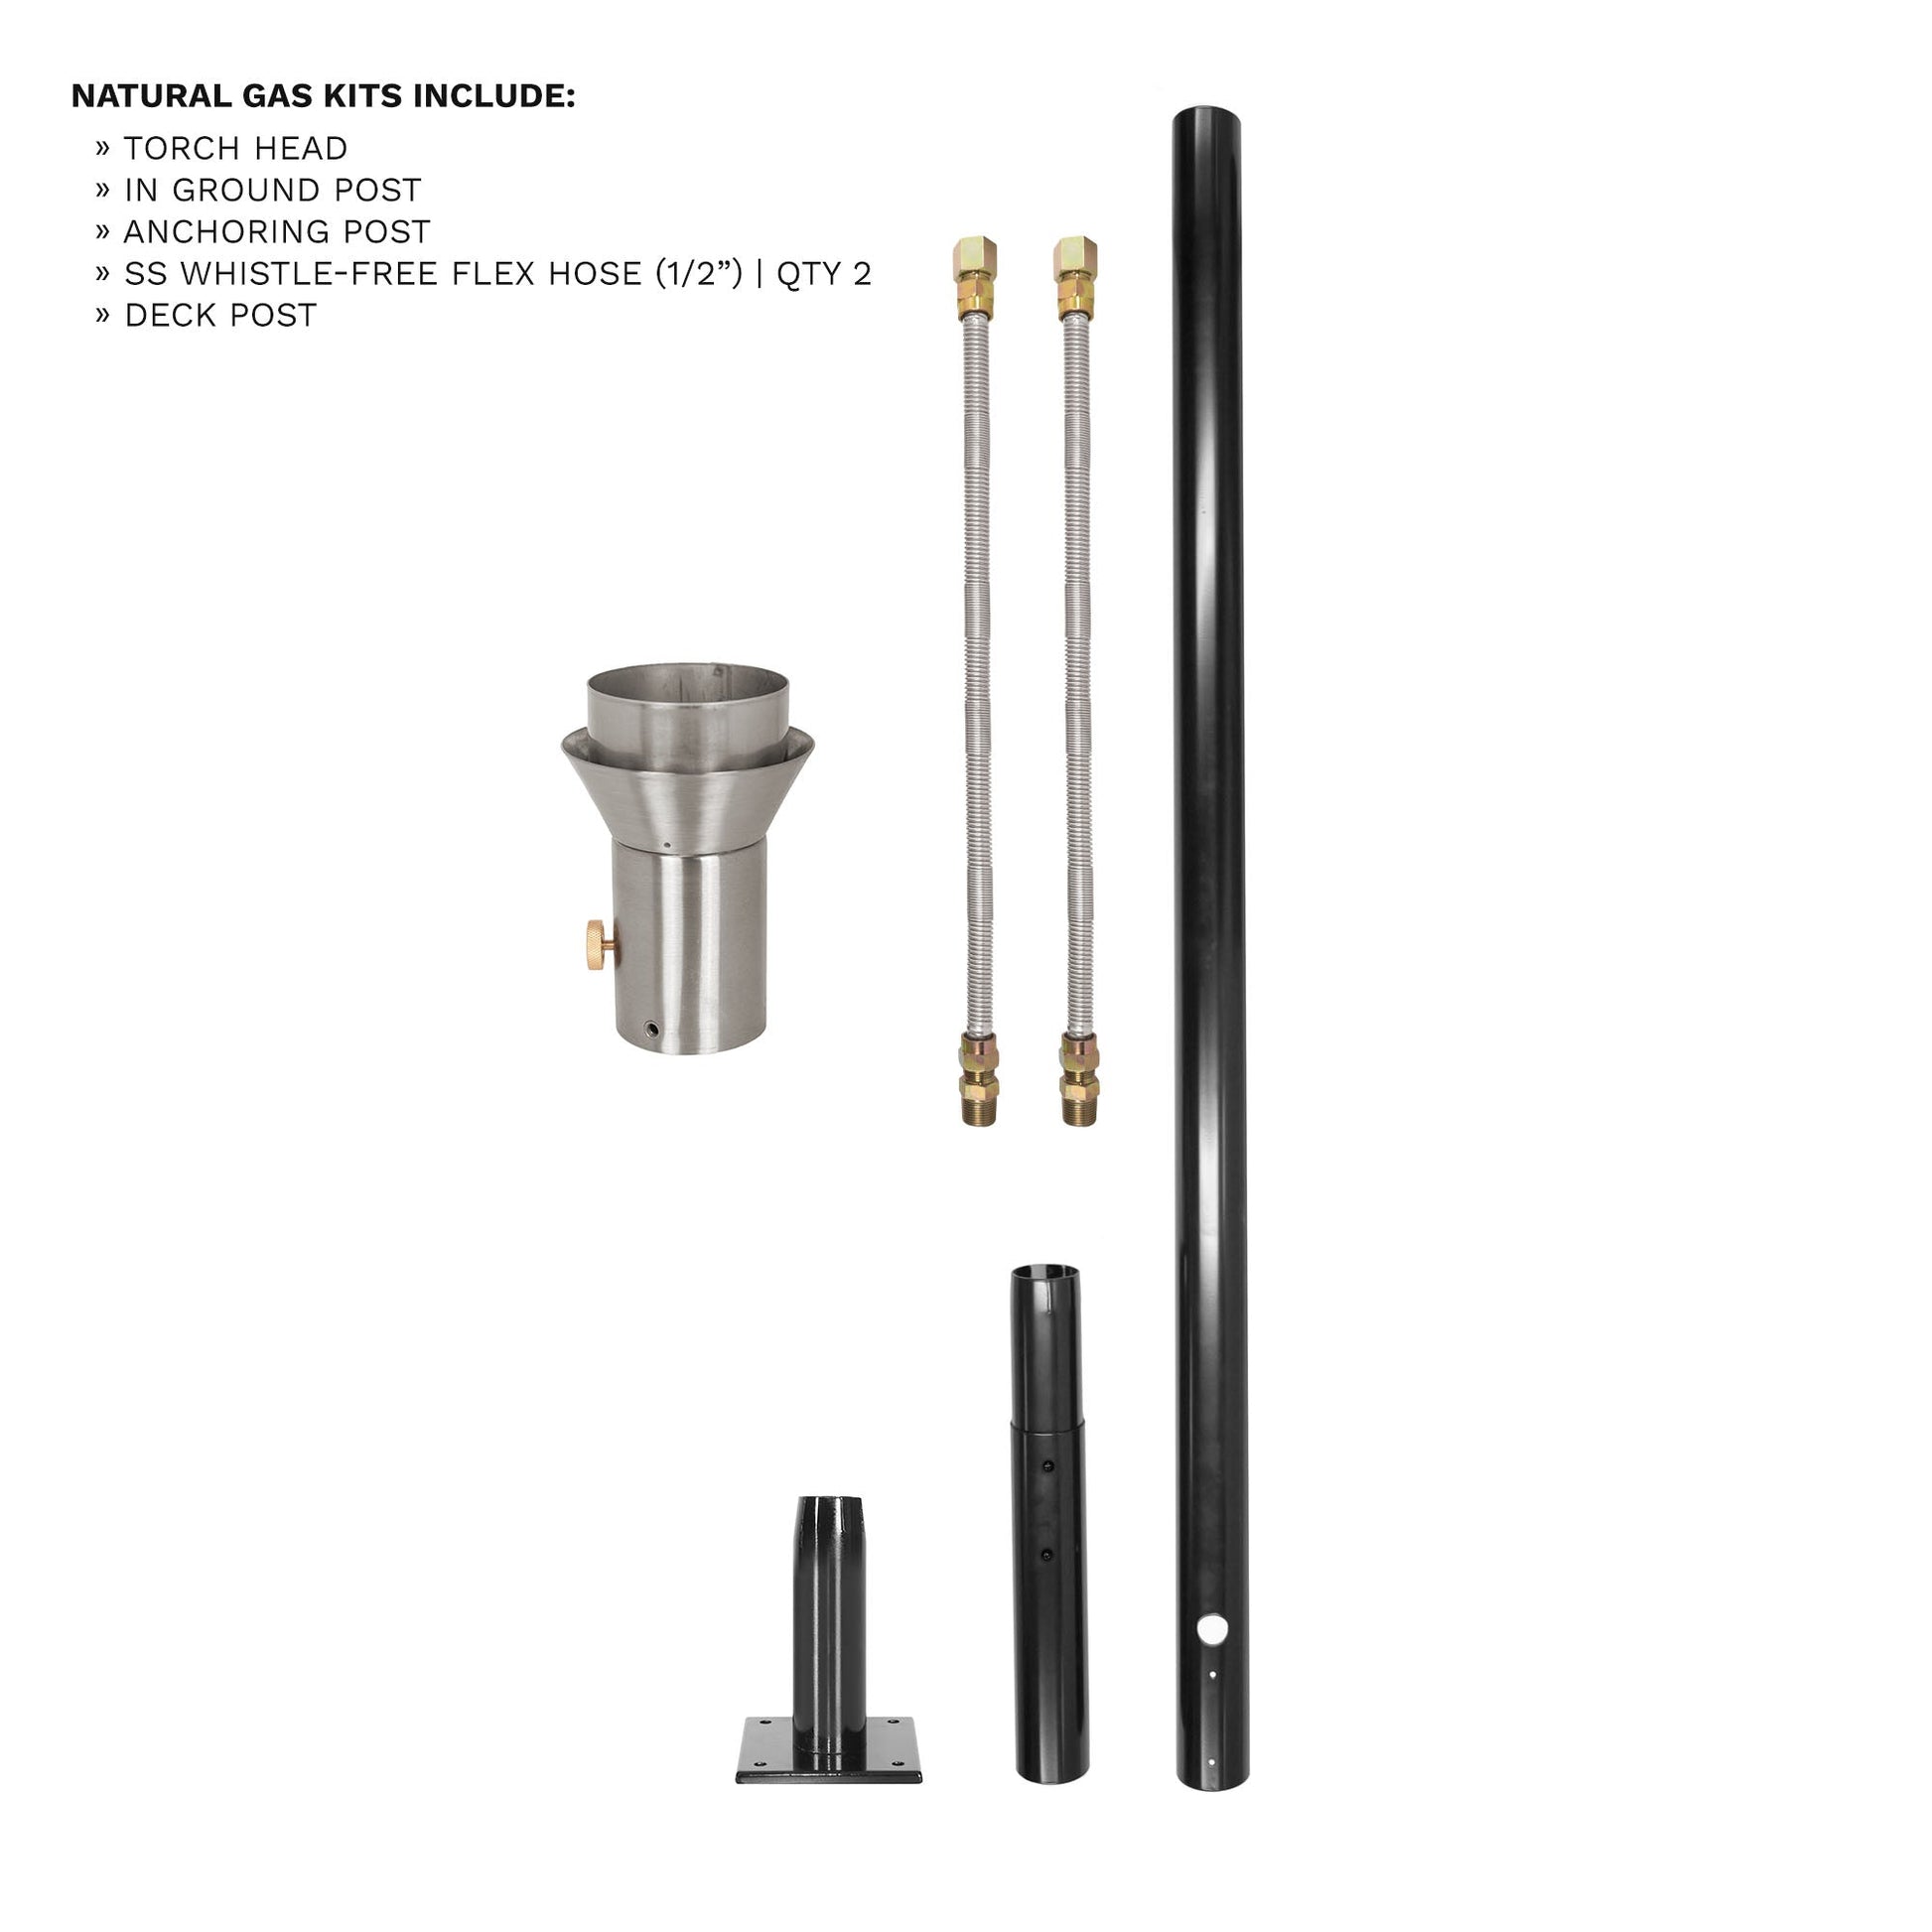 Trojan Original TOP Torch & Post Complete Kit - Stainless Steel - Natural Gas-Novel Home